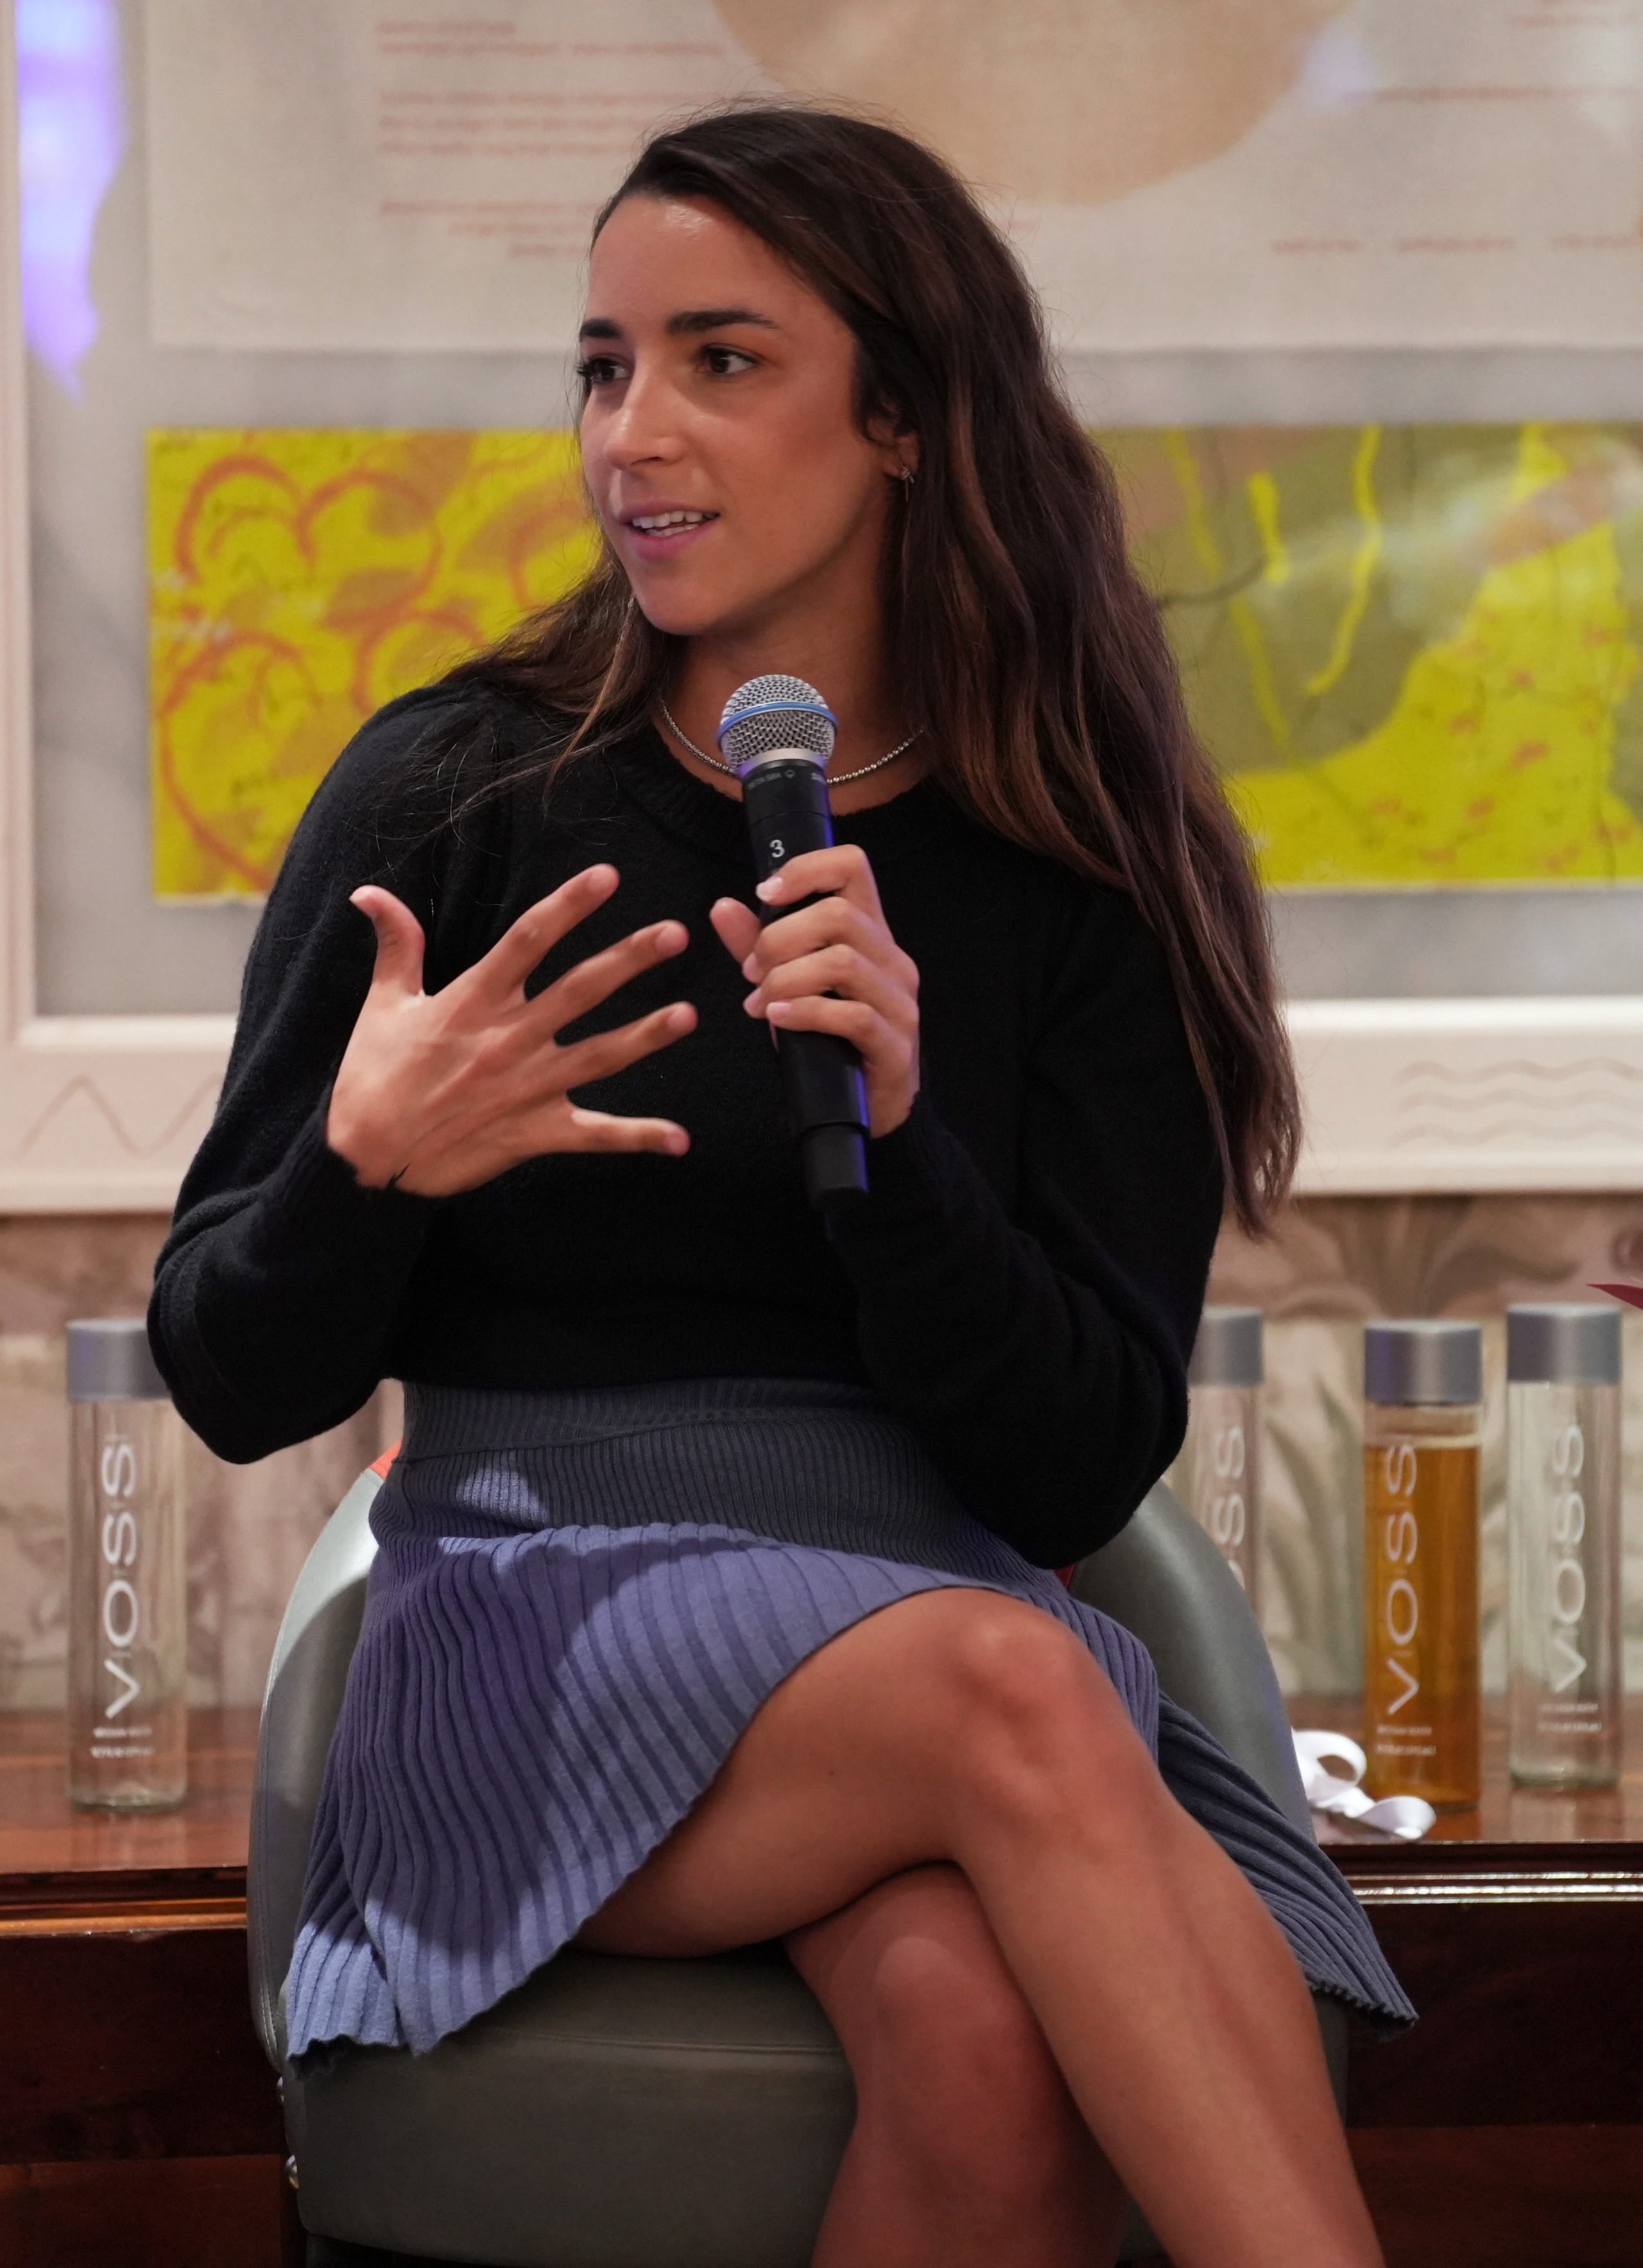 NEW YORK, NEW YORK - SEPTEMBER 12: Aly Raisman speaks at the Retail Influencer CEO Forum featuring the Z Suite at Crosby Street Hotel on September 12, 2022 in New York City. Ilya S. Savenok/Getty Images for Berns Communications Group